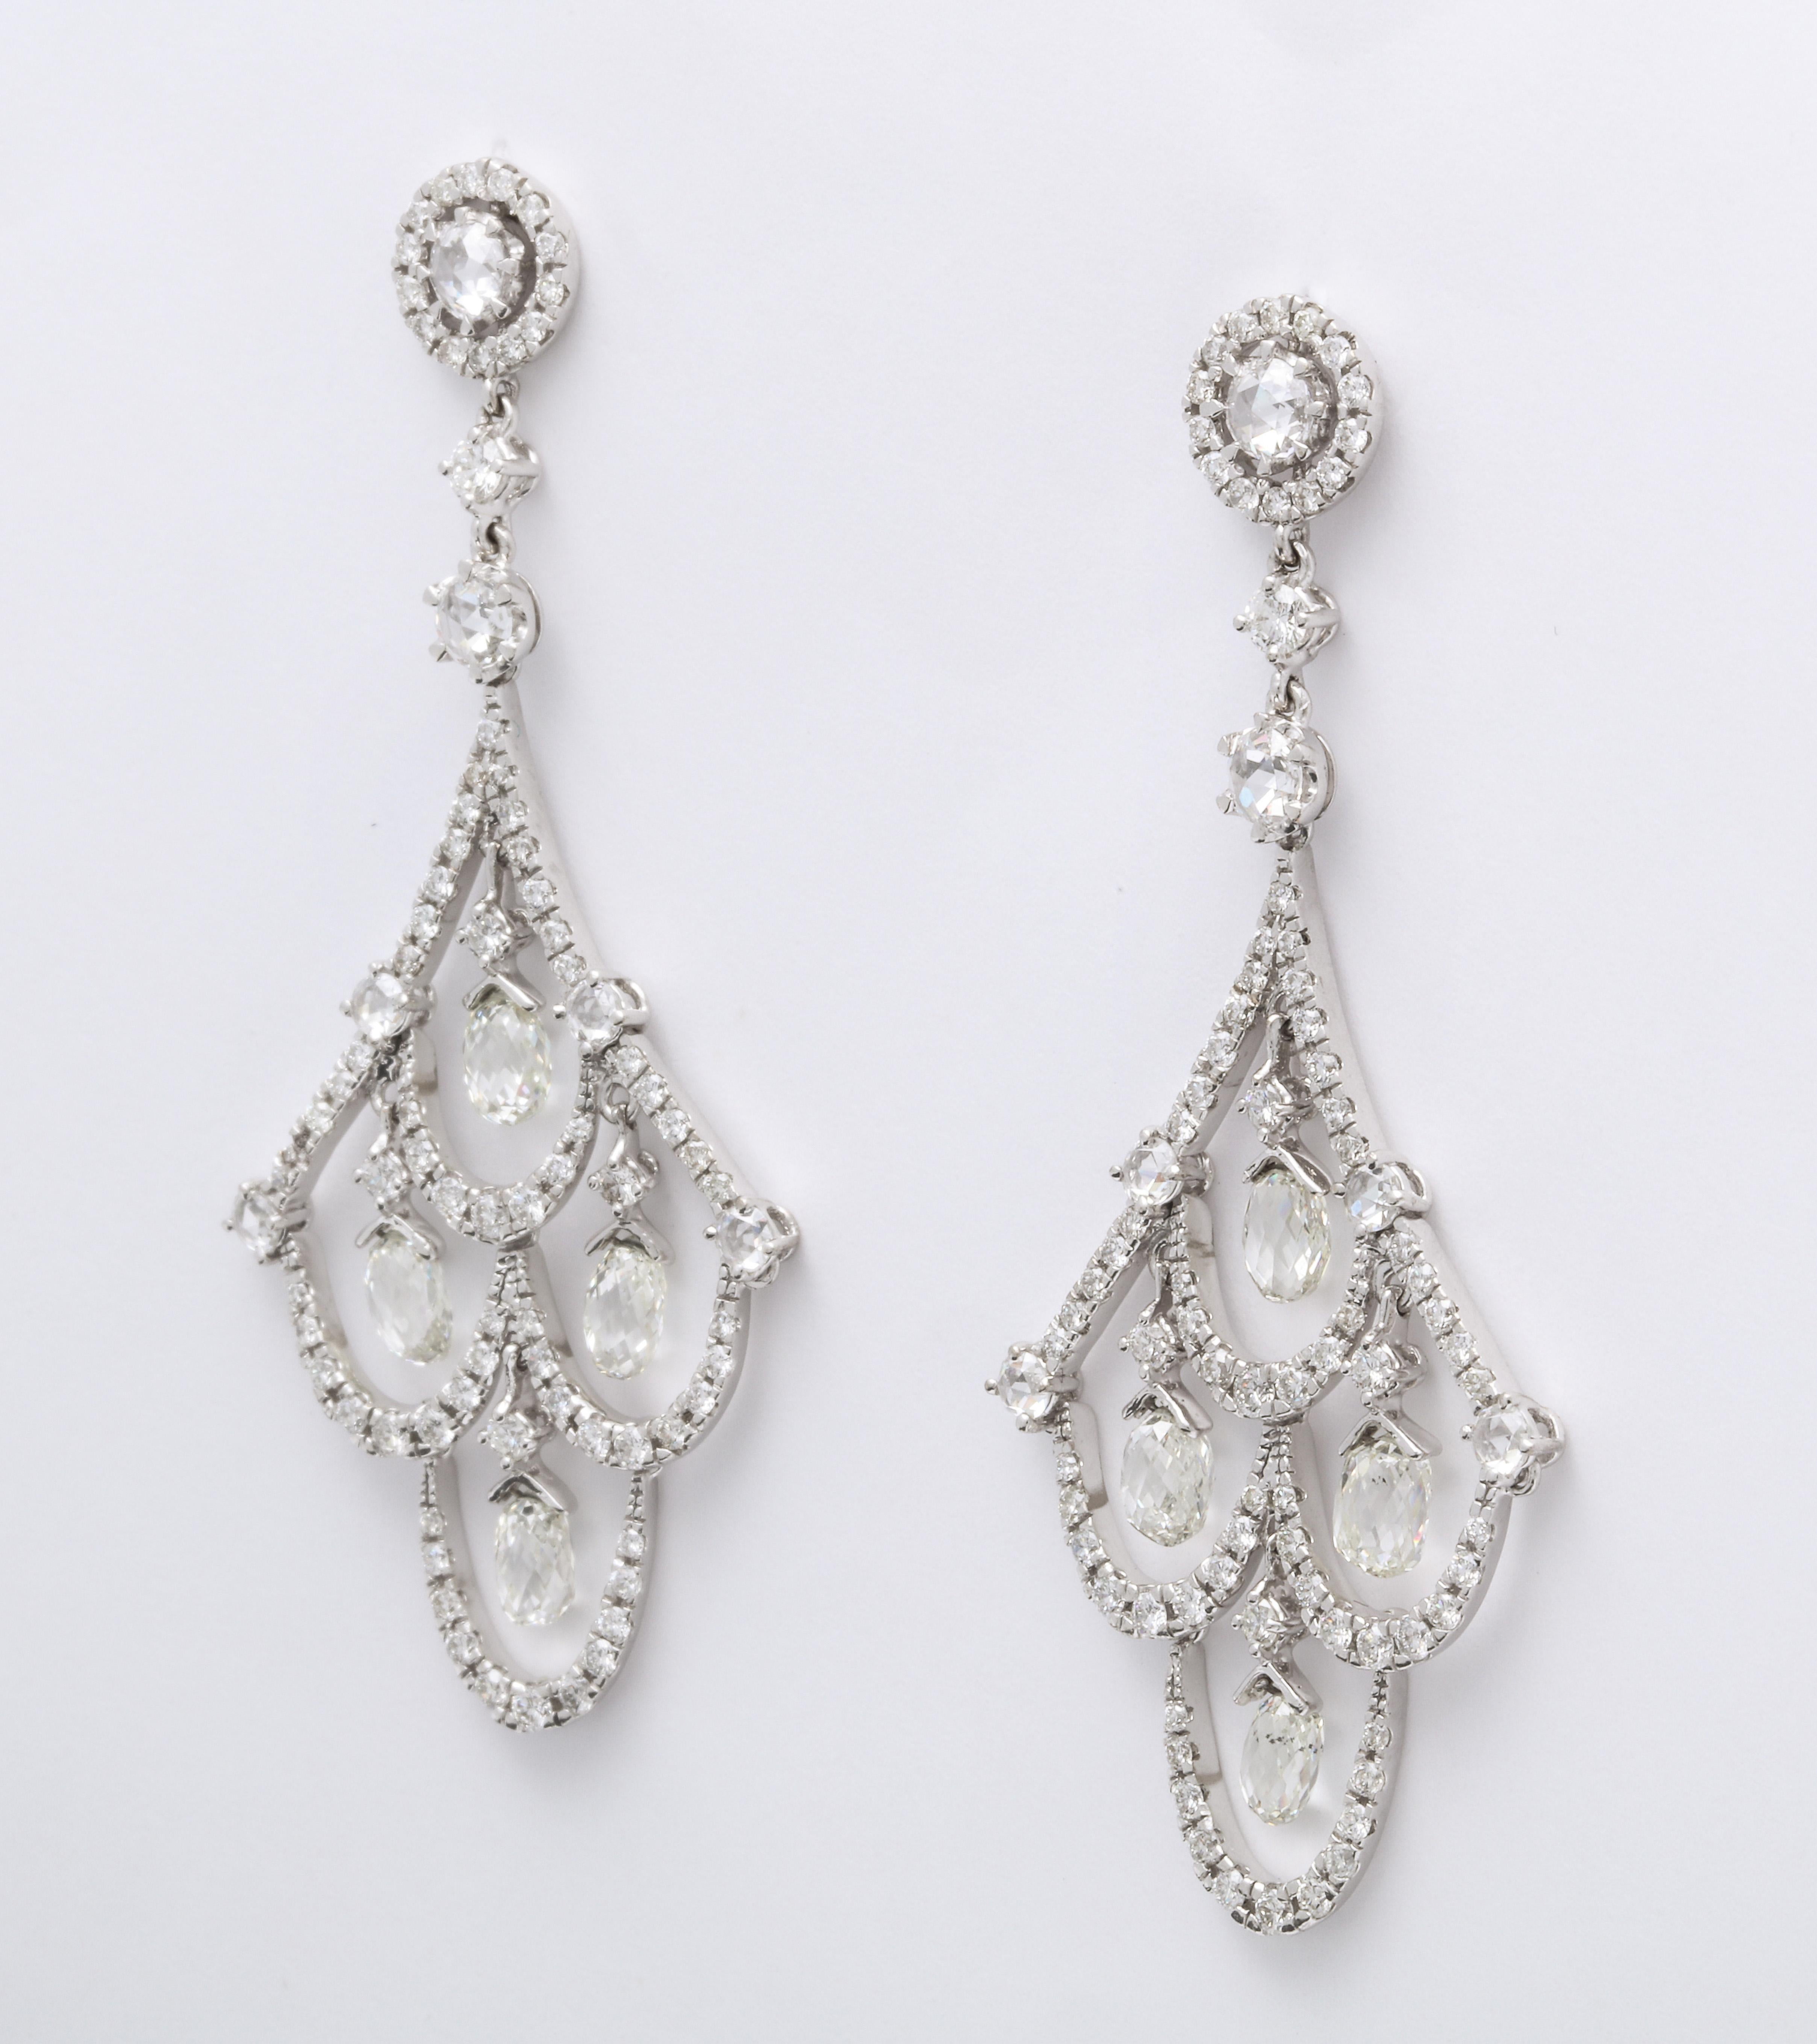 Articulating 18K white gold stylized festoon chandelier ear pendants decorated with pave'-set round brilliant-cut diamonds, mounted with round rose-cut diamond joints, and suspending floating colorless diamond briolettes, combined diamond weight: